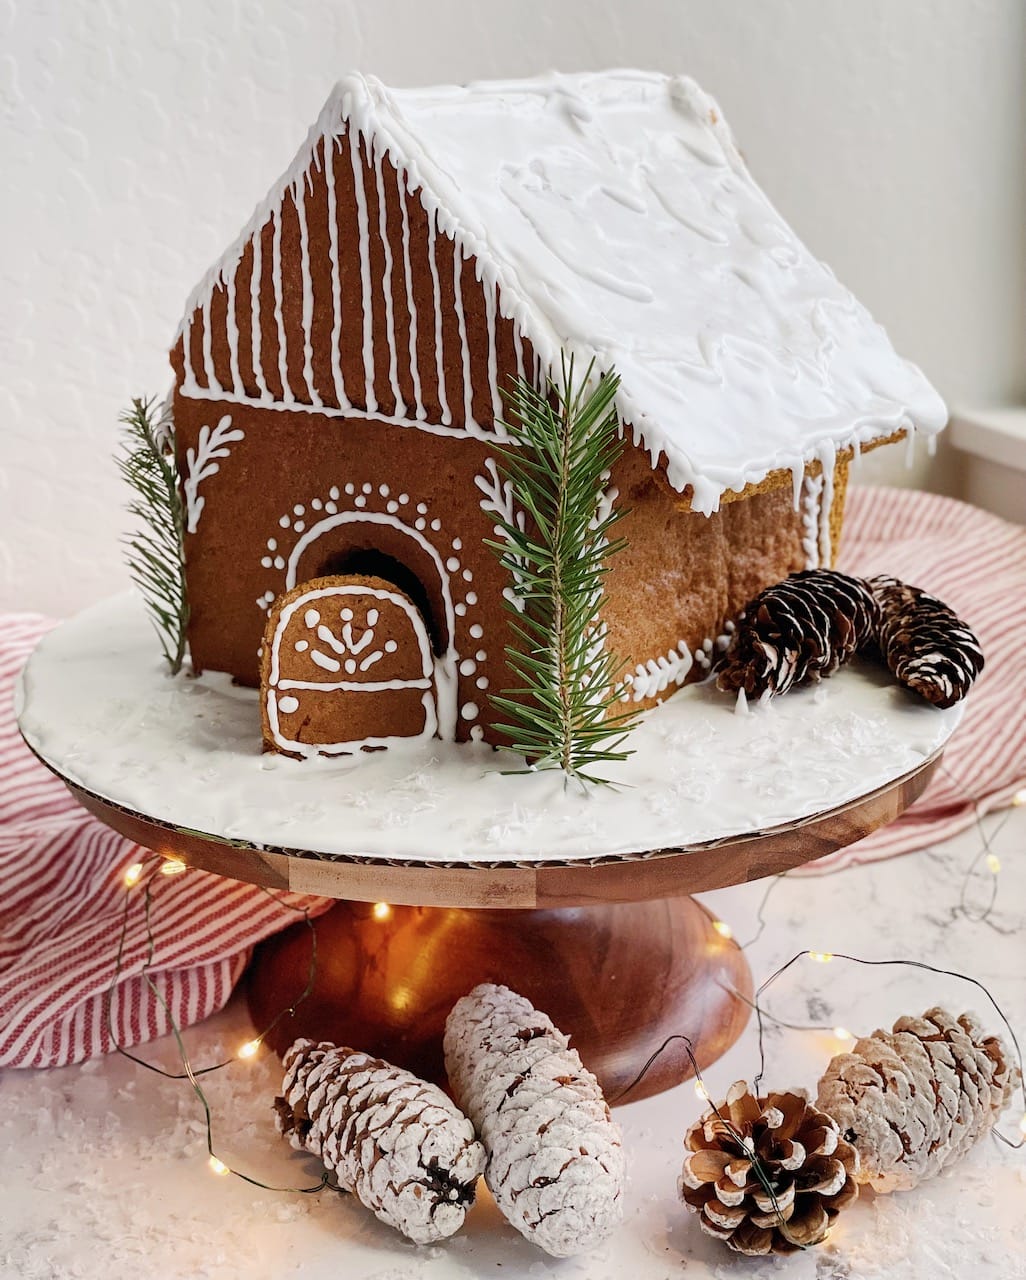 How to Make a Gingerbread House Recipe